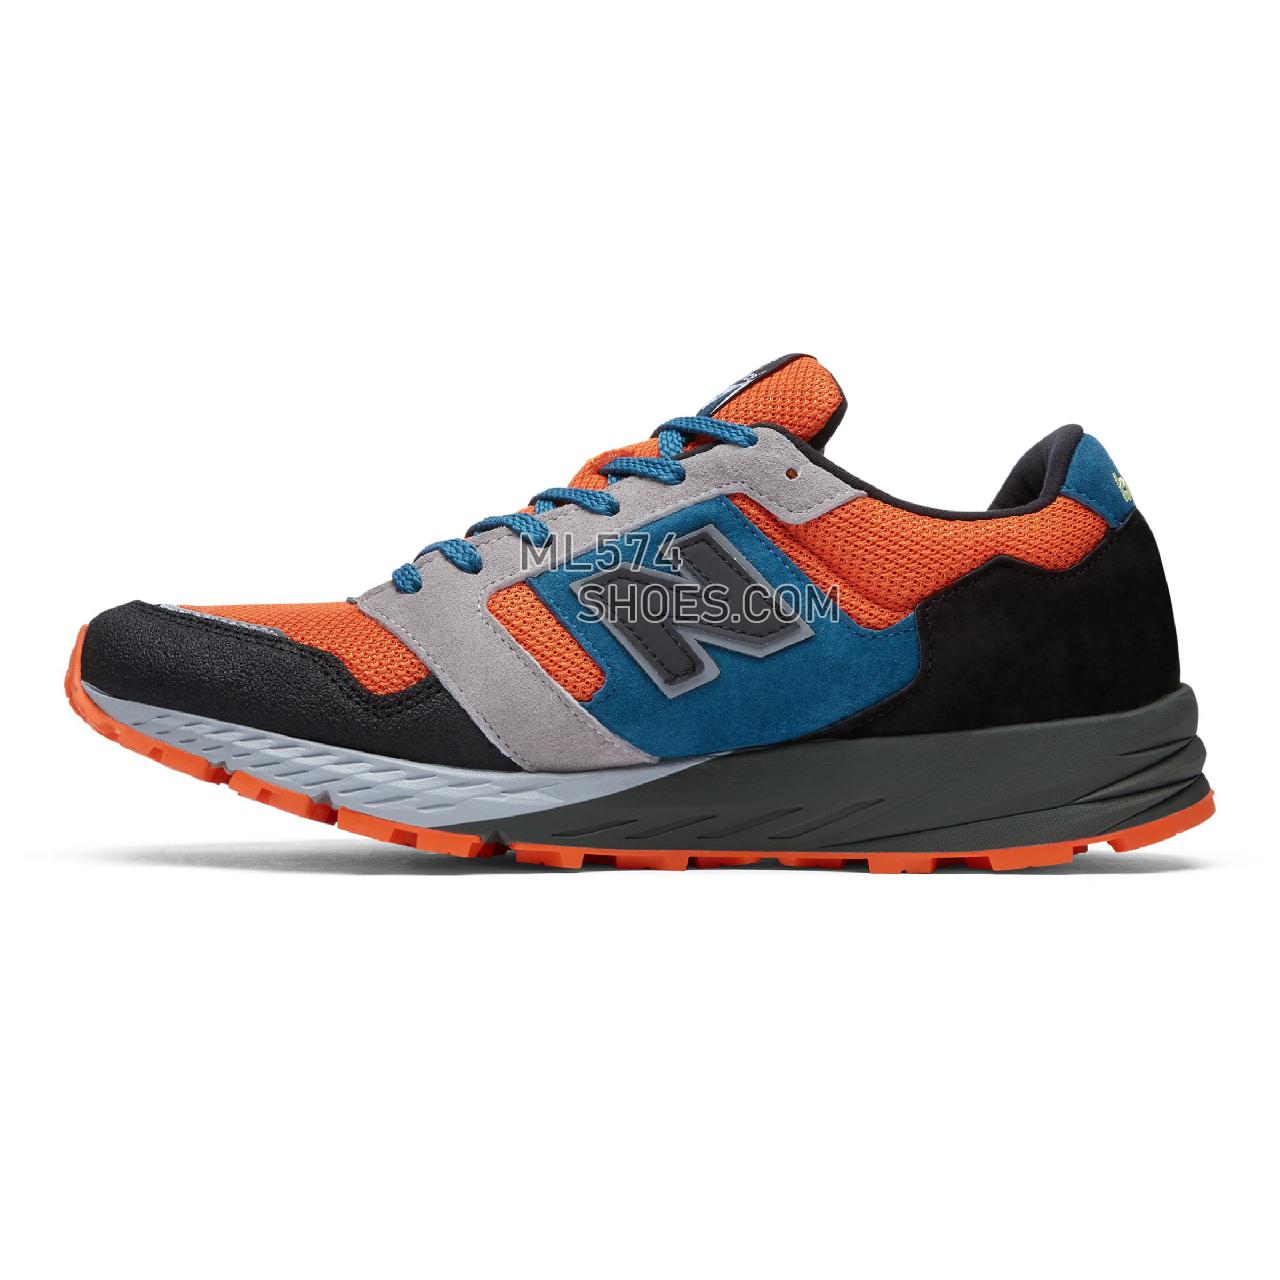 New Balance Made in UK 575 - Men's Made in USA And UK Sneakers - Black with Orange and Petrol - MTL575OP